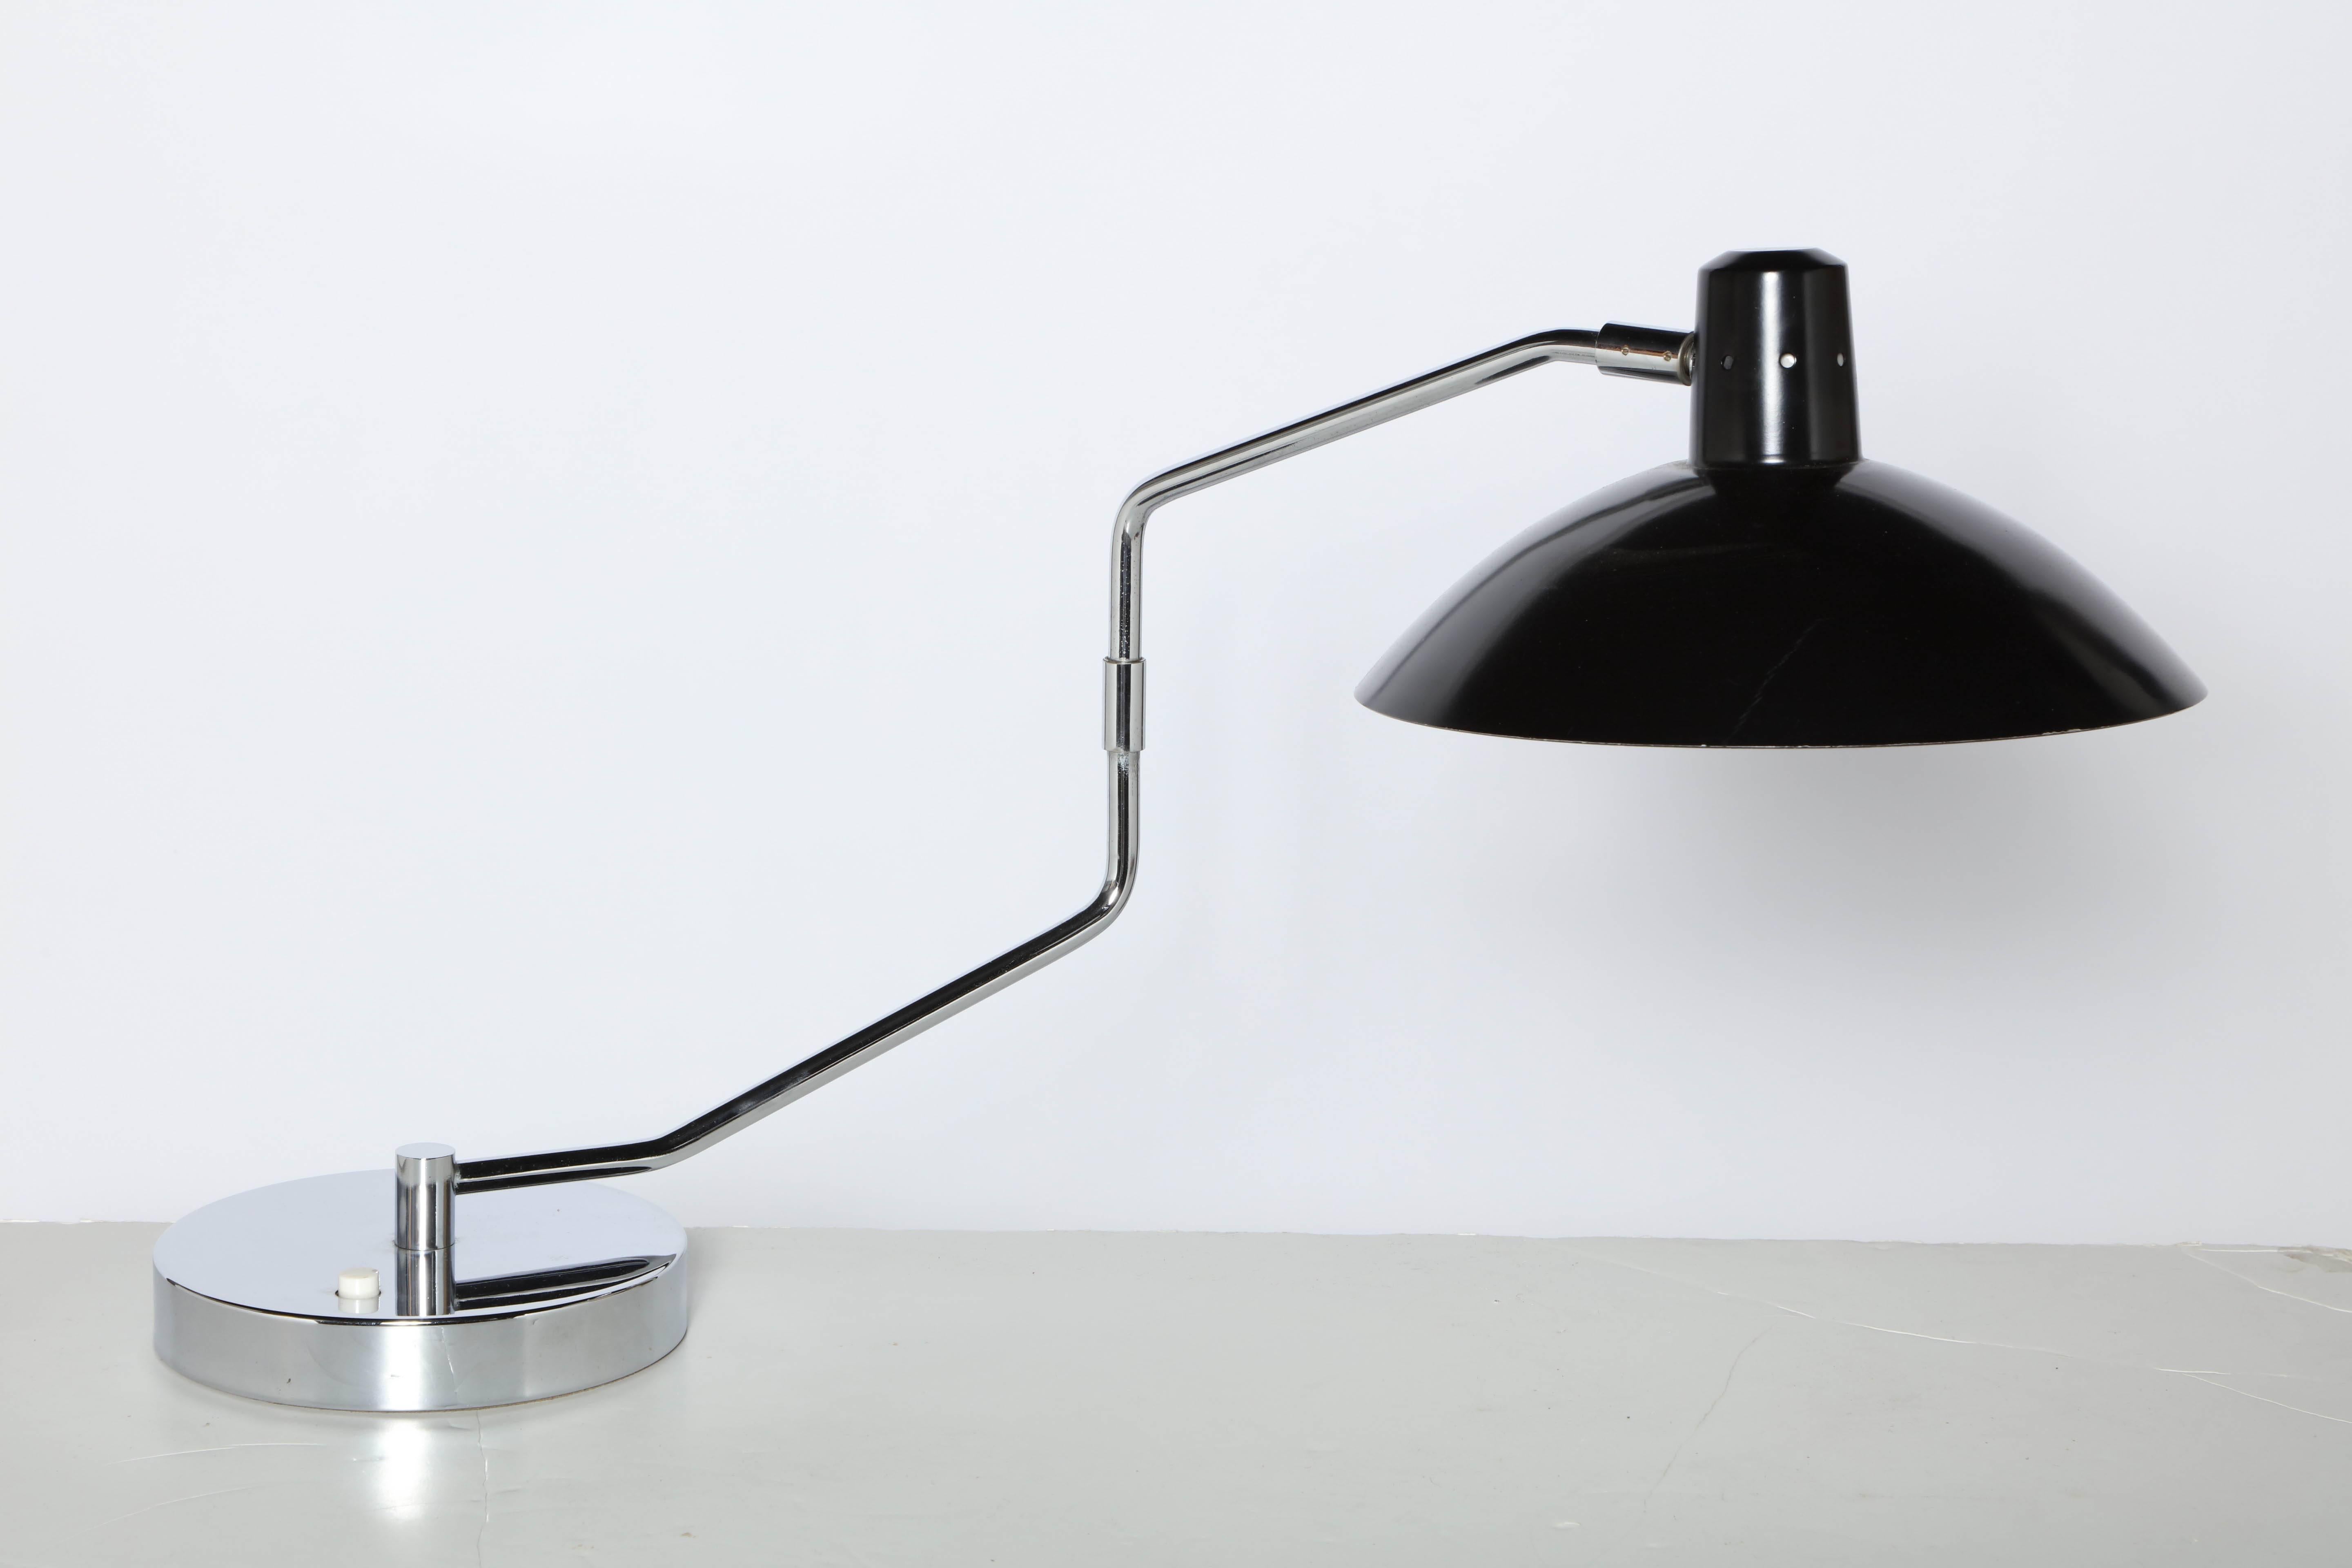 French Clay Michie for Knoll No. 8 Swing Arm Chrome Desk Lamp with Black Shade